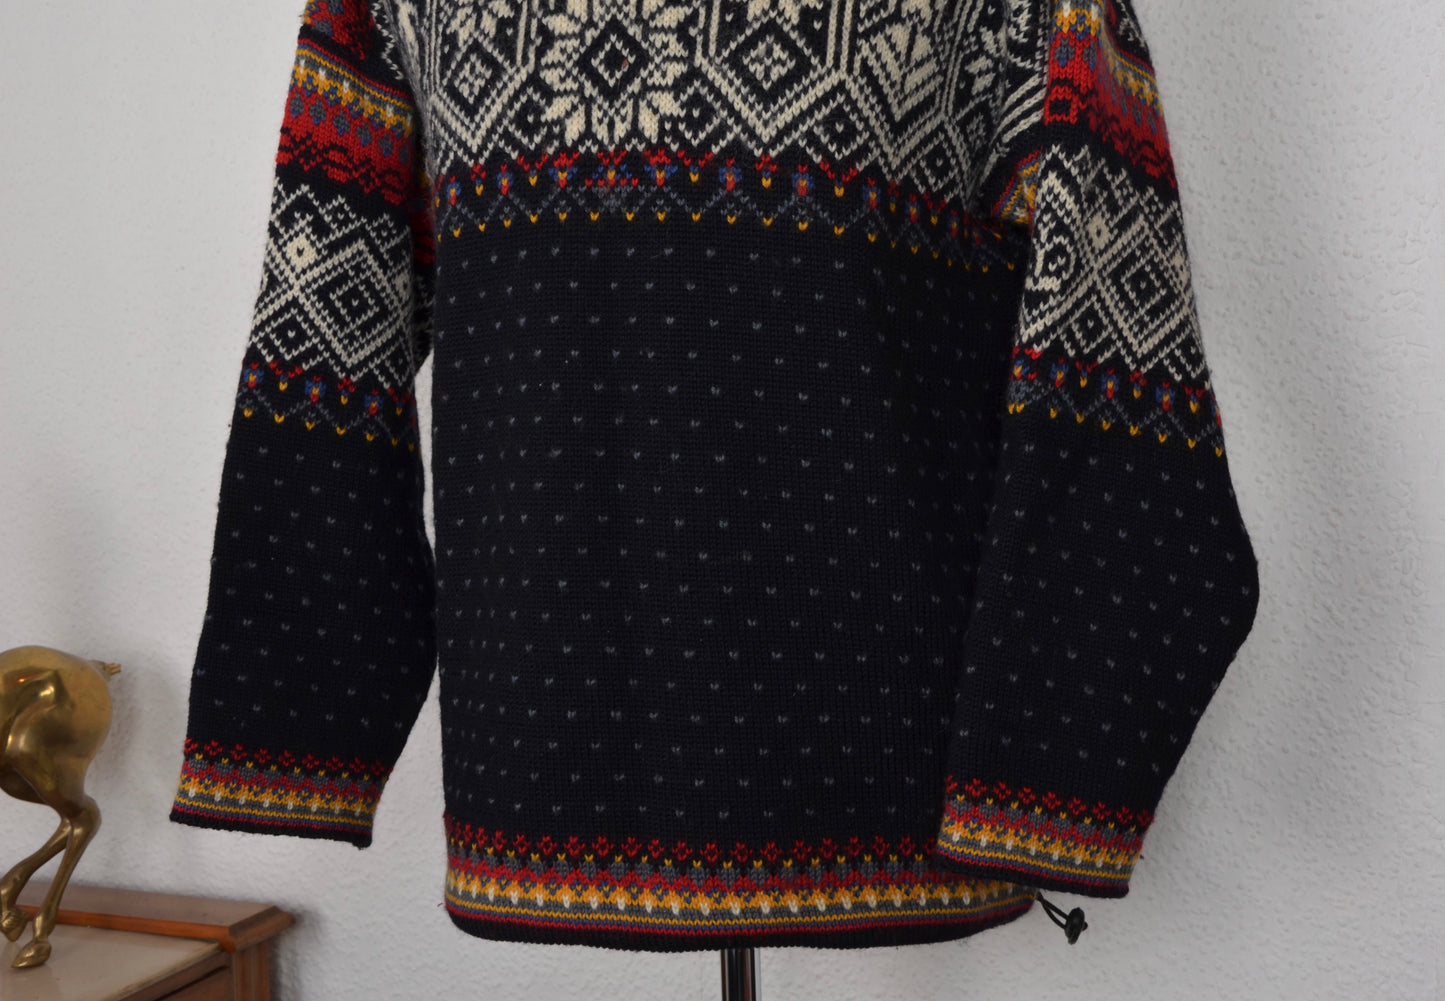 Dale of Norway Knit Sweater - Black, Red, White